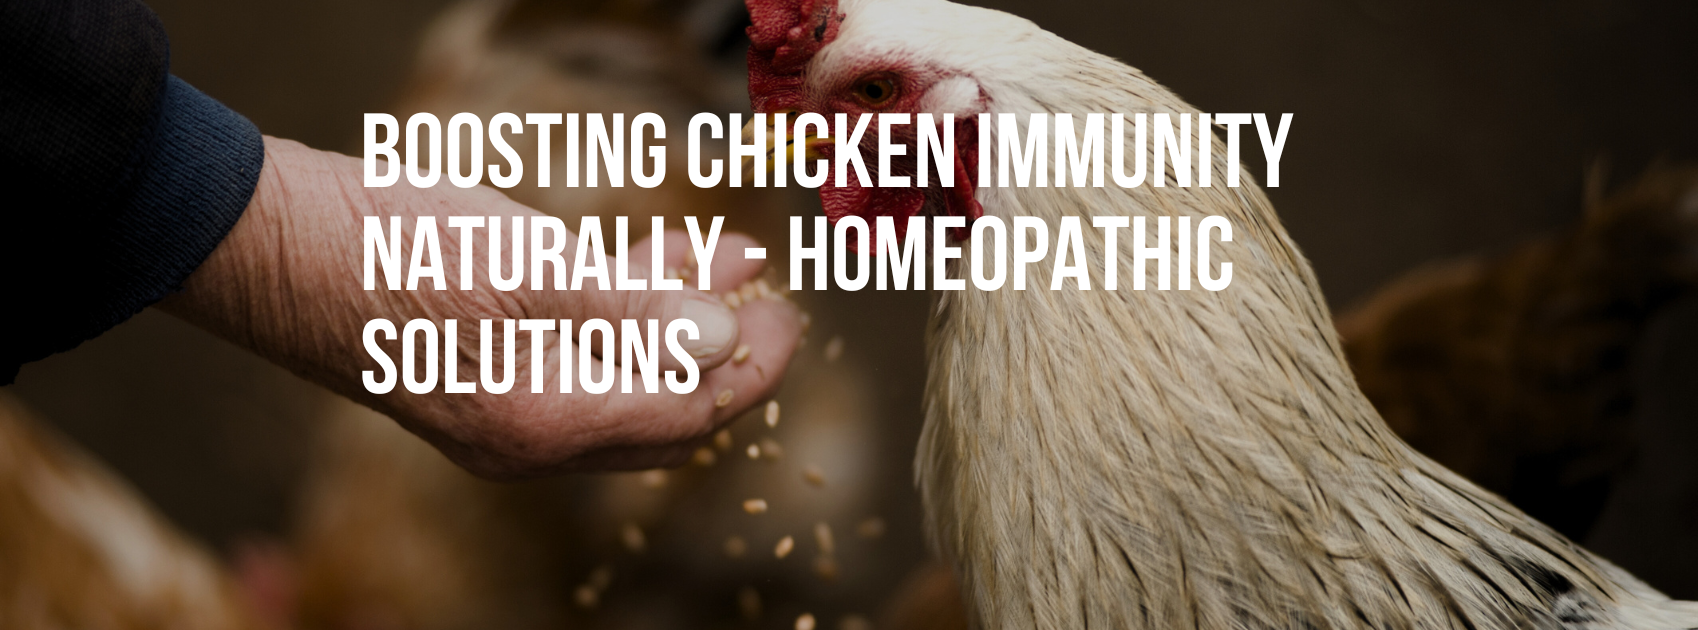 Boosting Chicken Immunity Naturally - Homeopathic Solutions